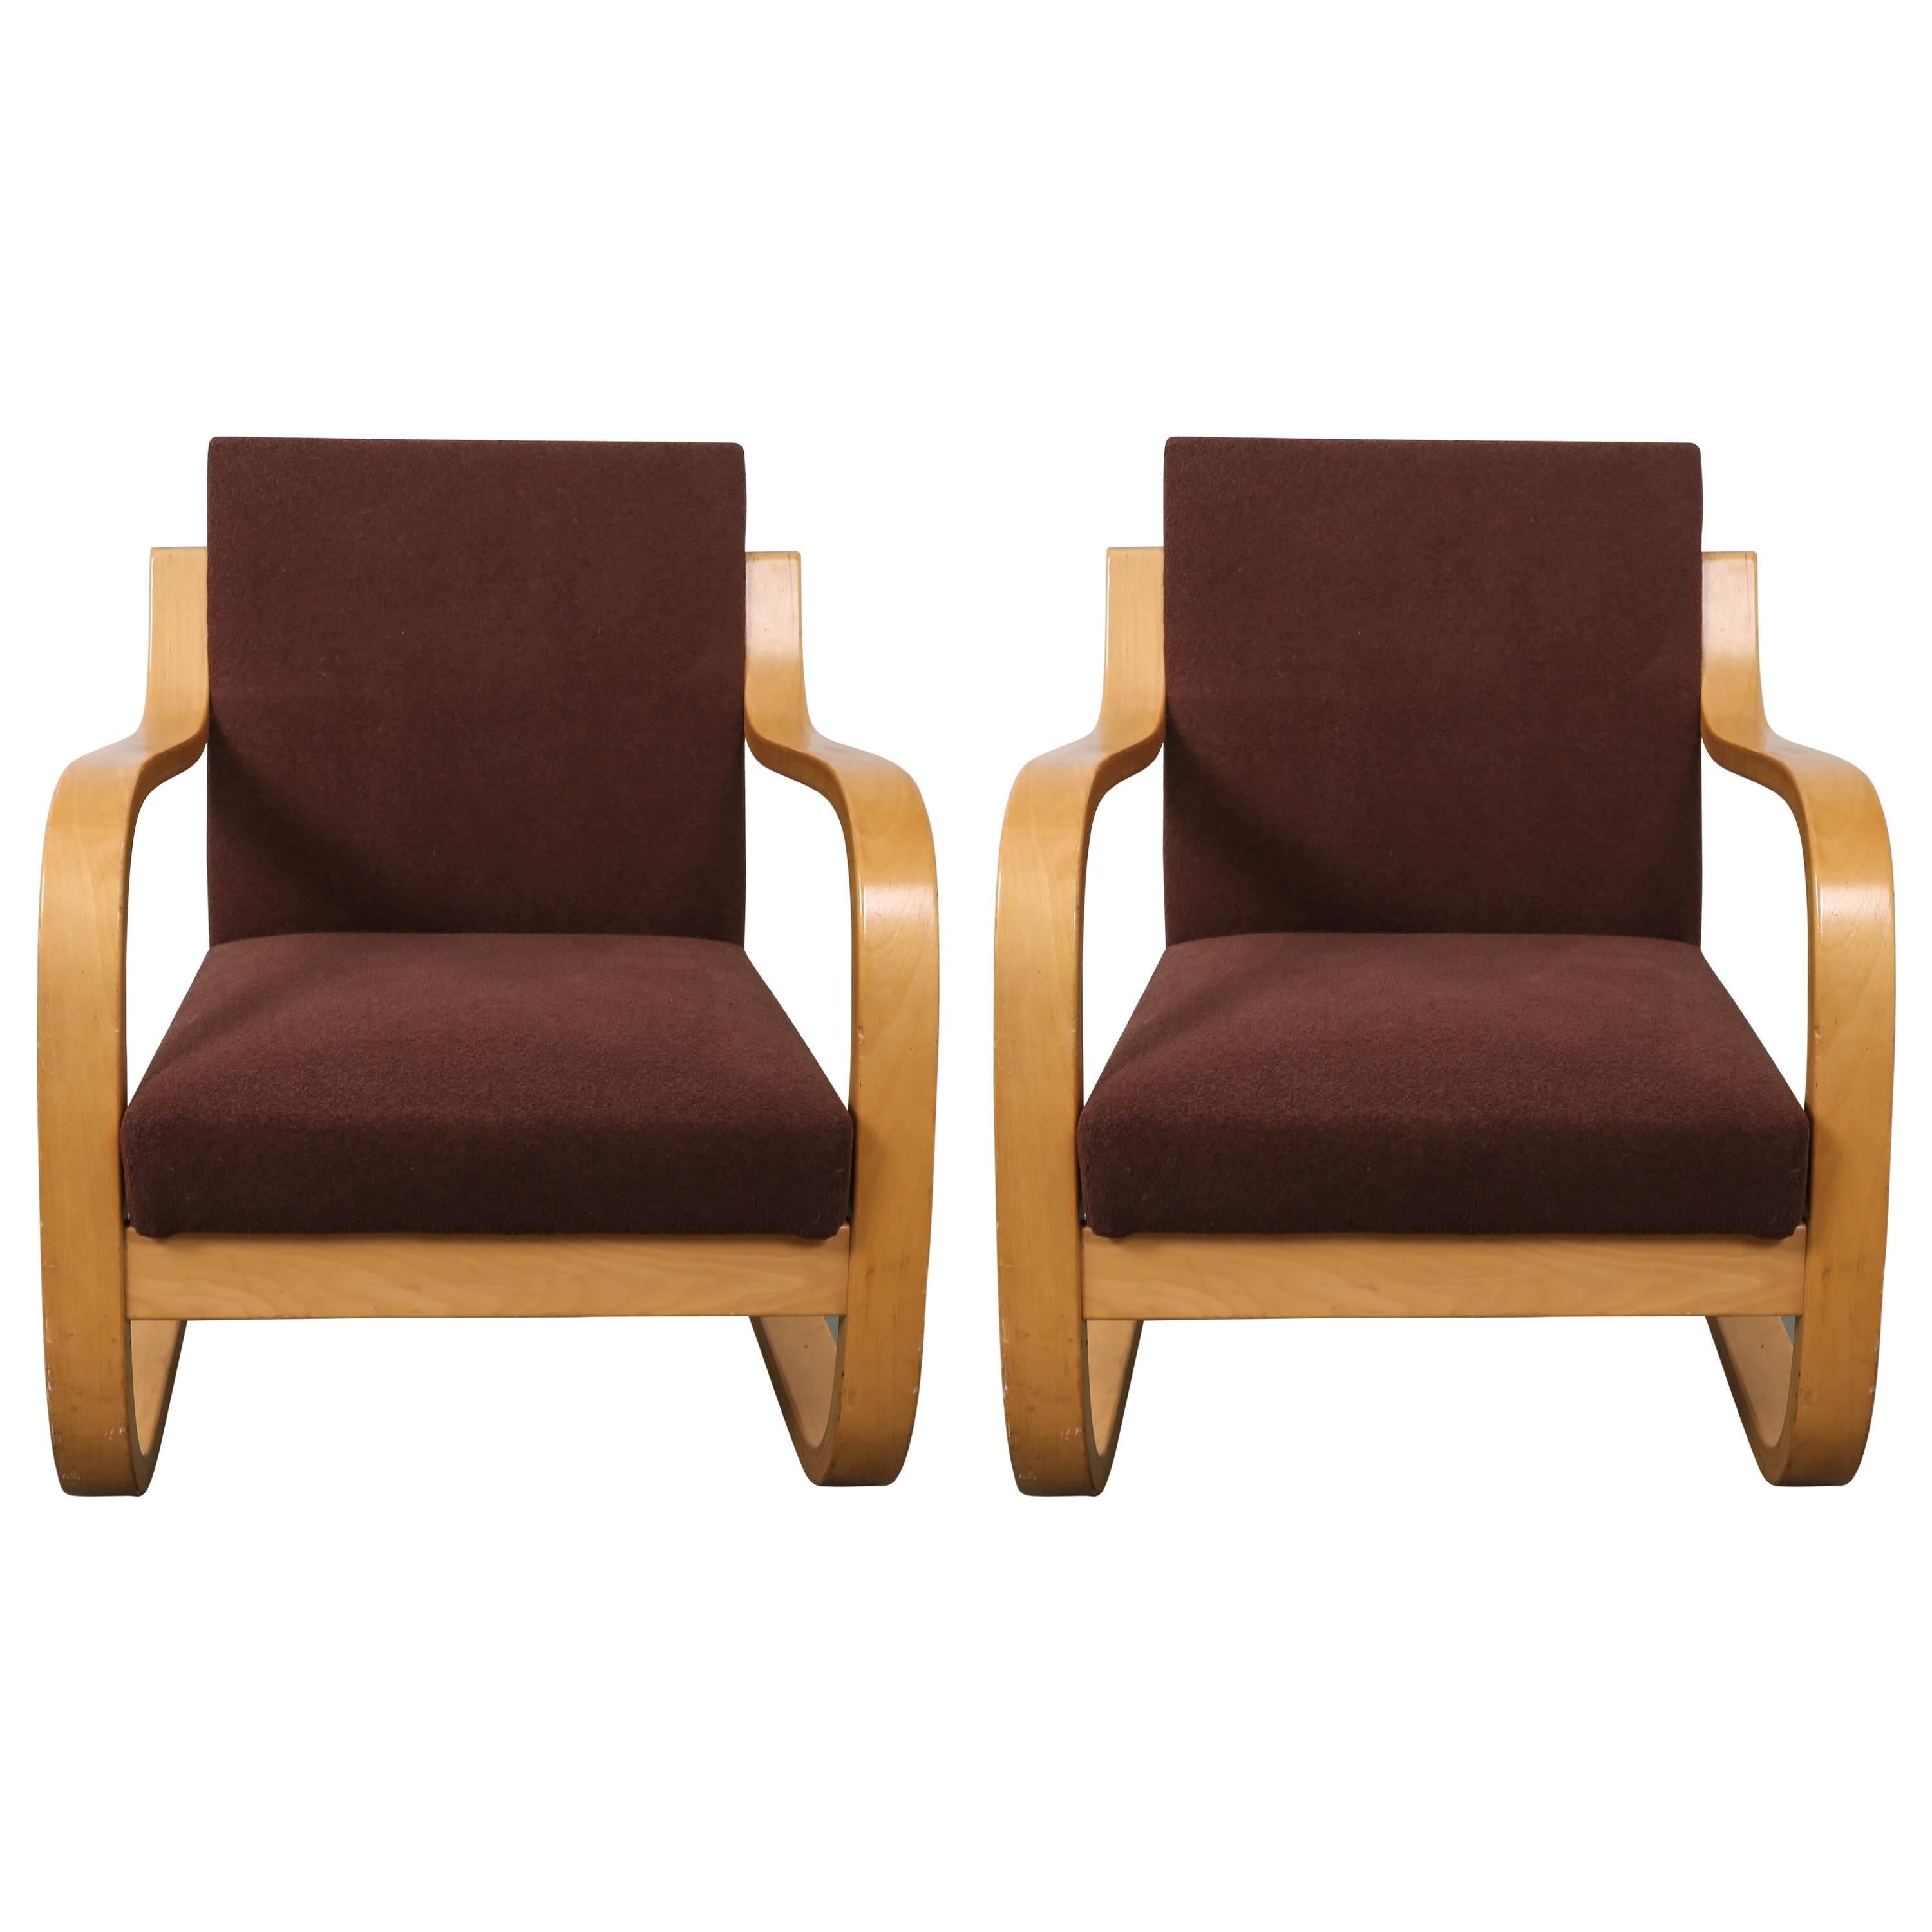 Pair of 34/402 Lounge Chairs by Alvar Aalto